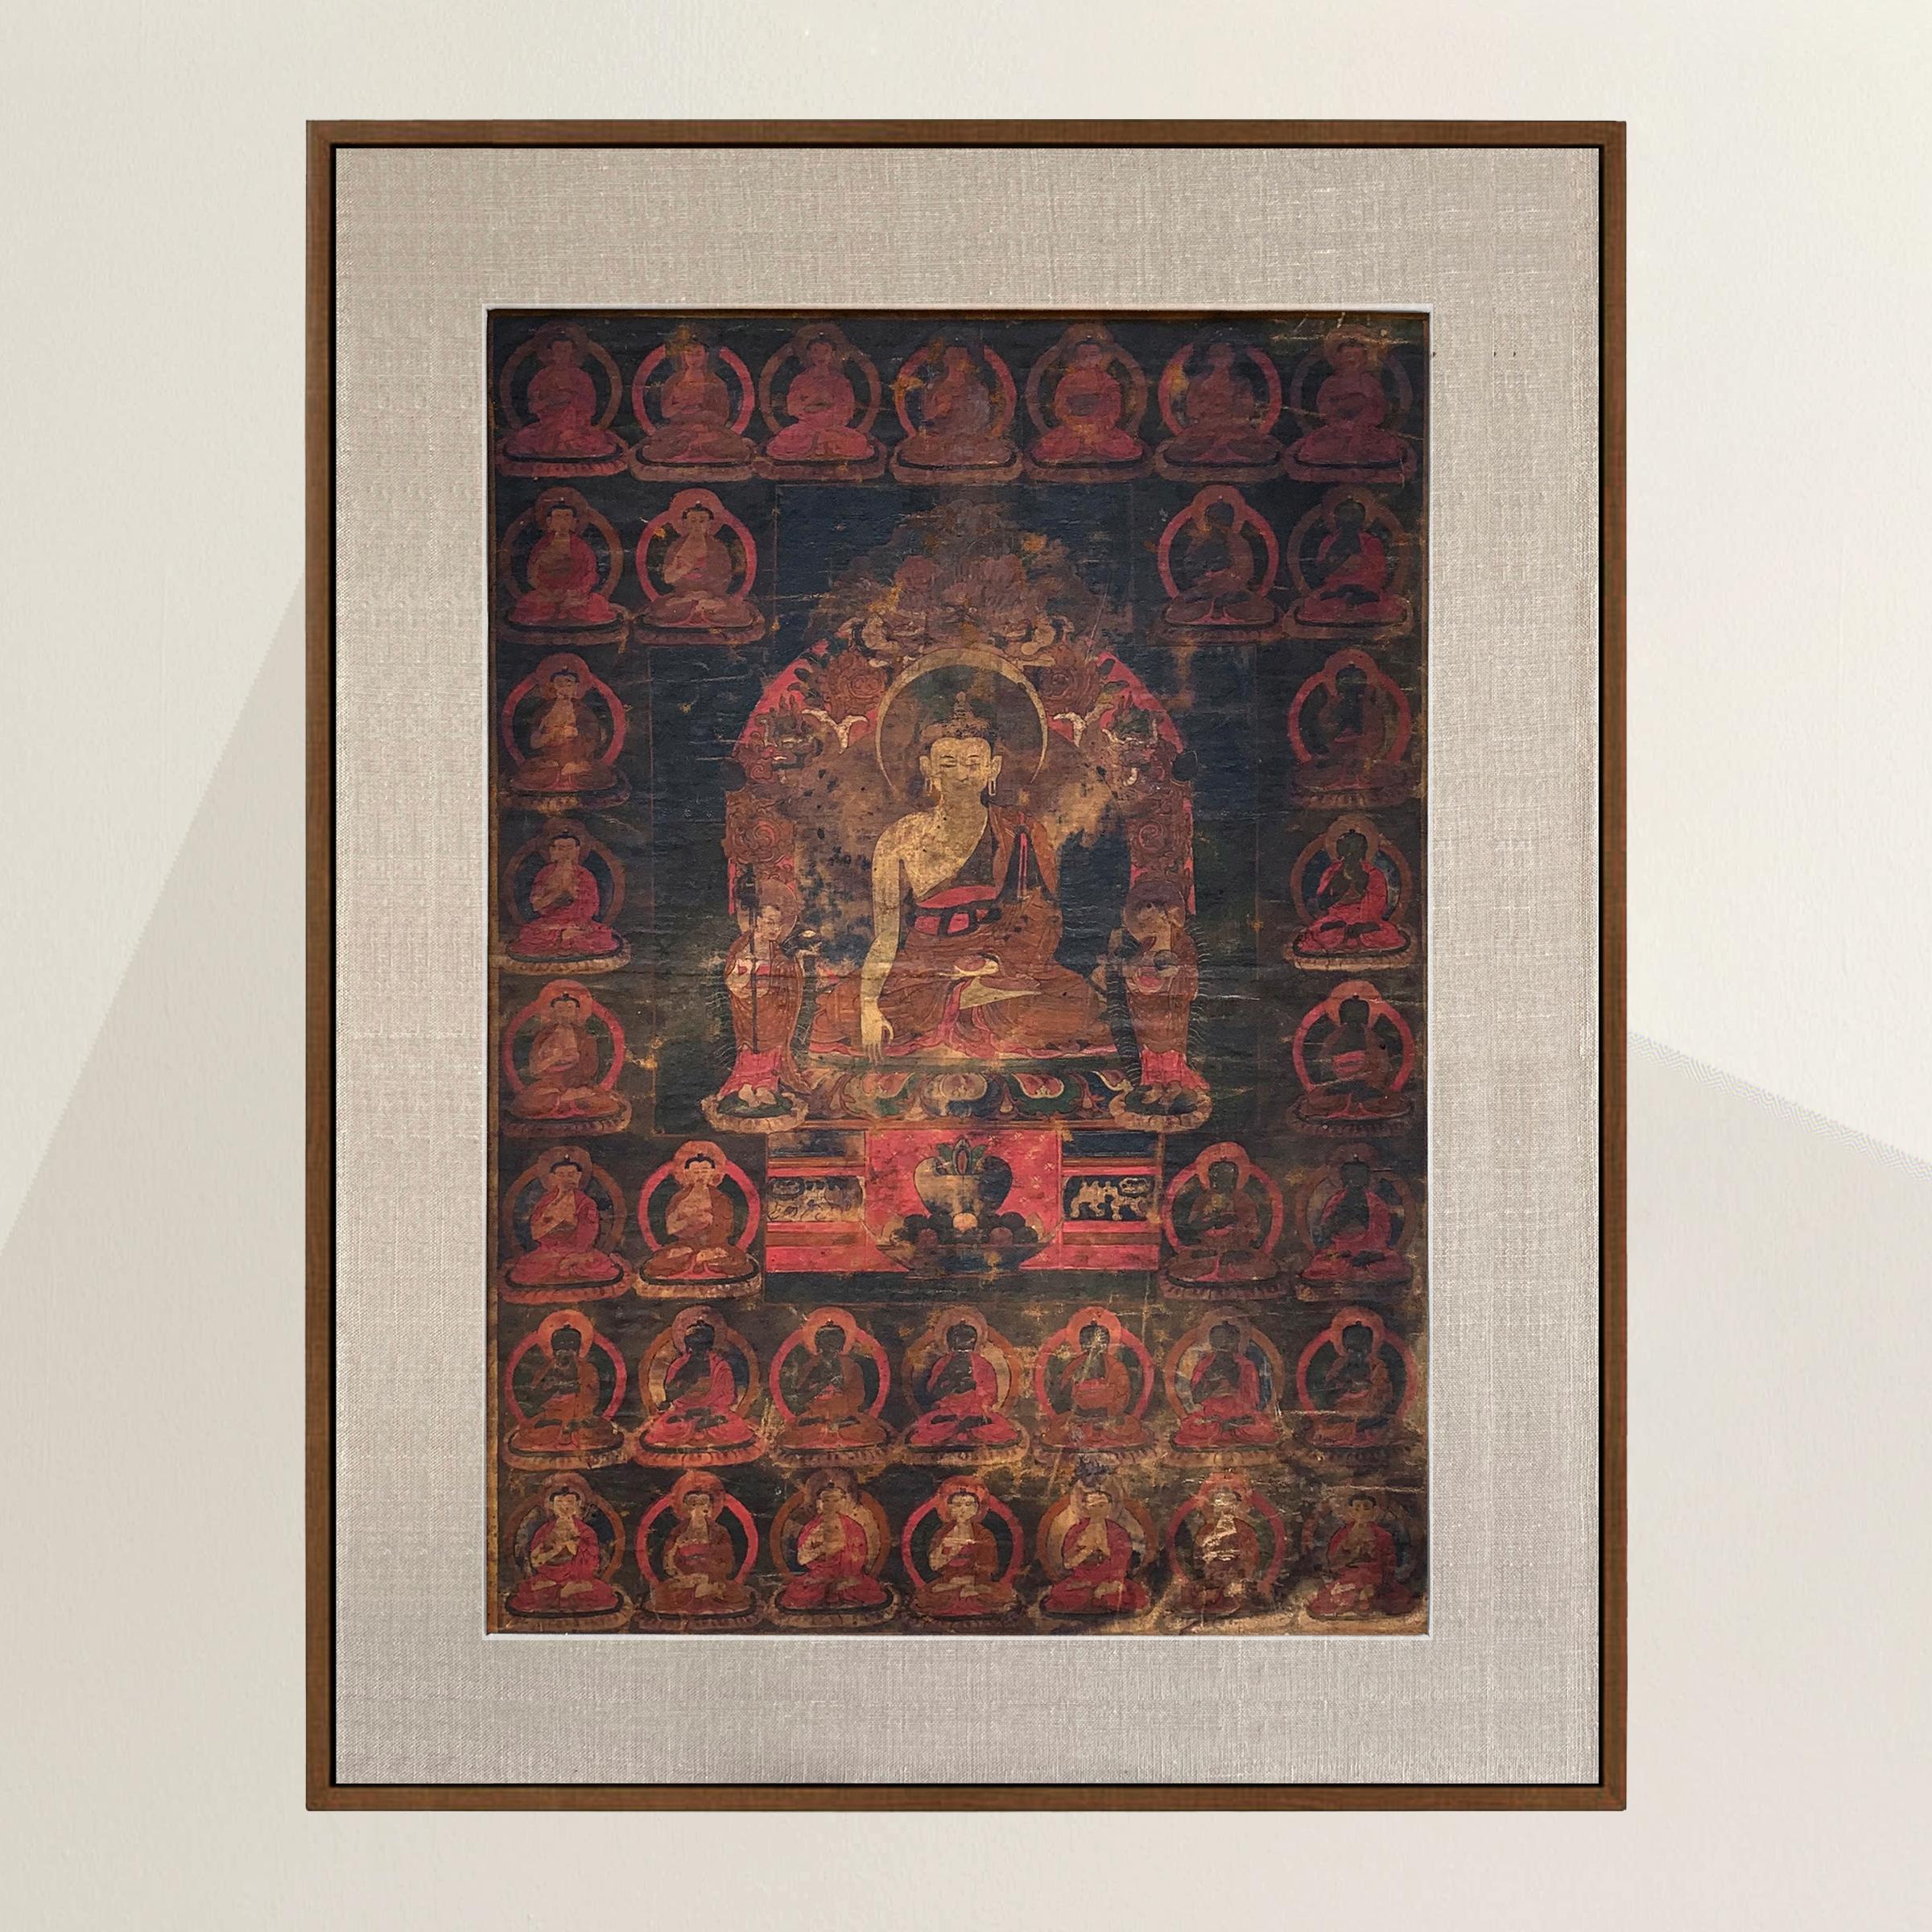 An incredible and rare 17th century (Ming Dynasty) Tibetan Thangka depicting the Medicine Buddha seated on a lotus throne with an alms bowl in one hand, and his other hand with outstretched fingers touching the ground, feeling the pulse of the